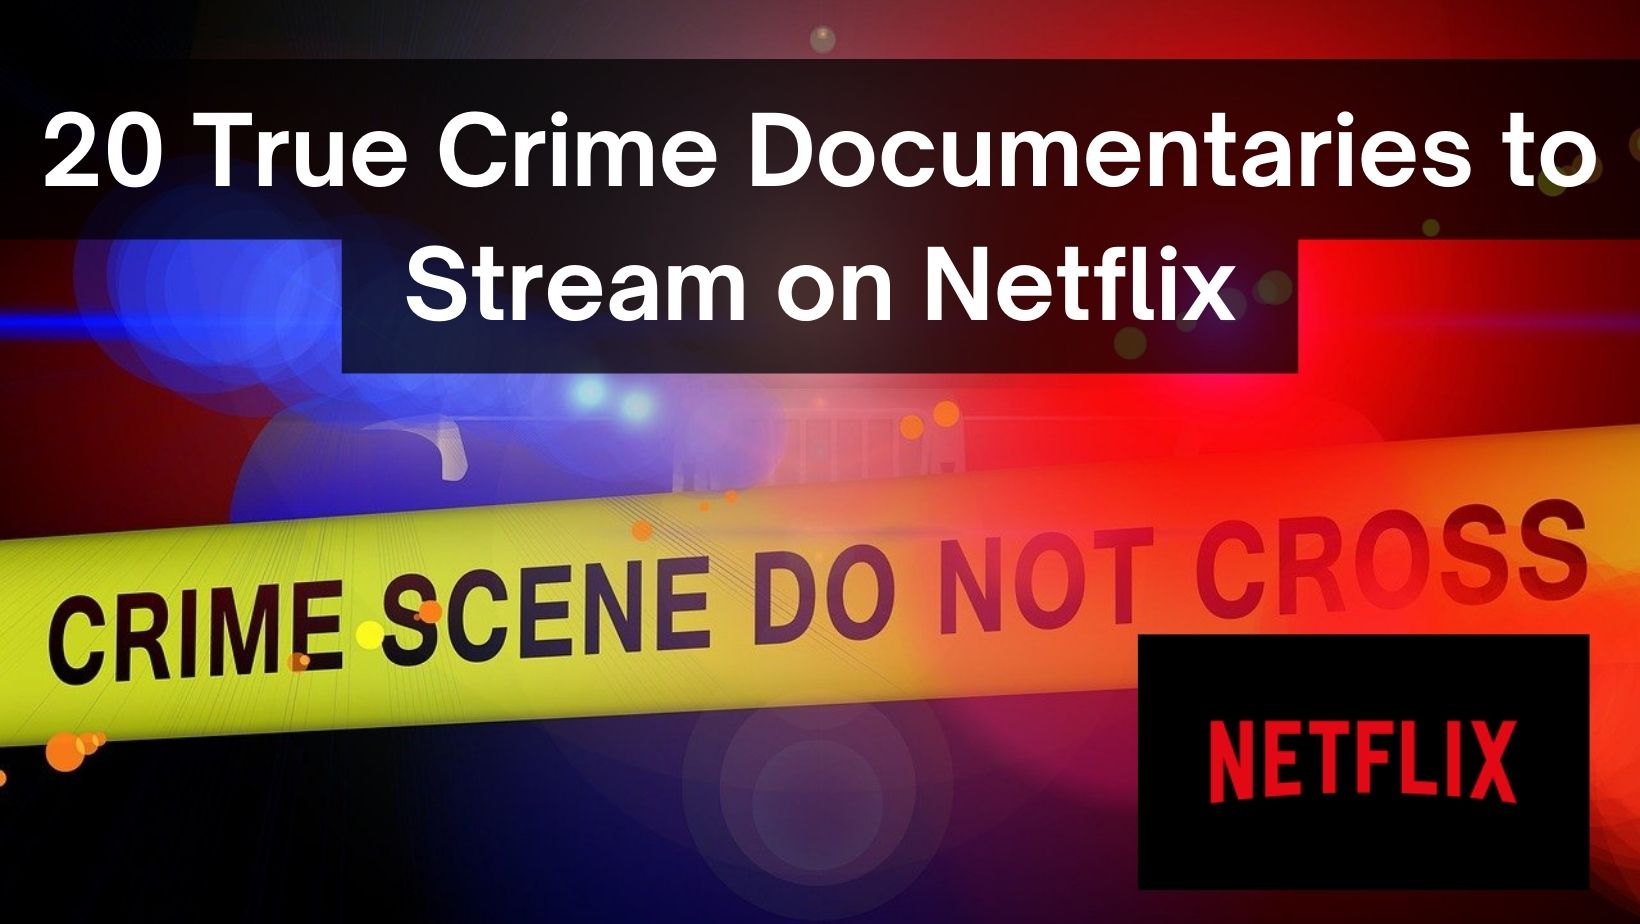 crime scene tape with text "20 true crime documentaries to stream on netflix"